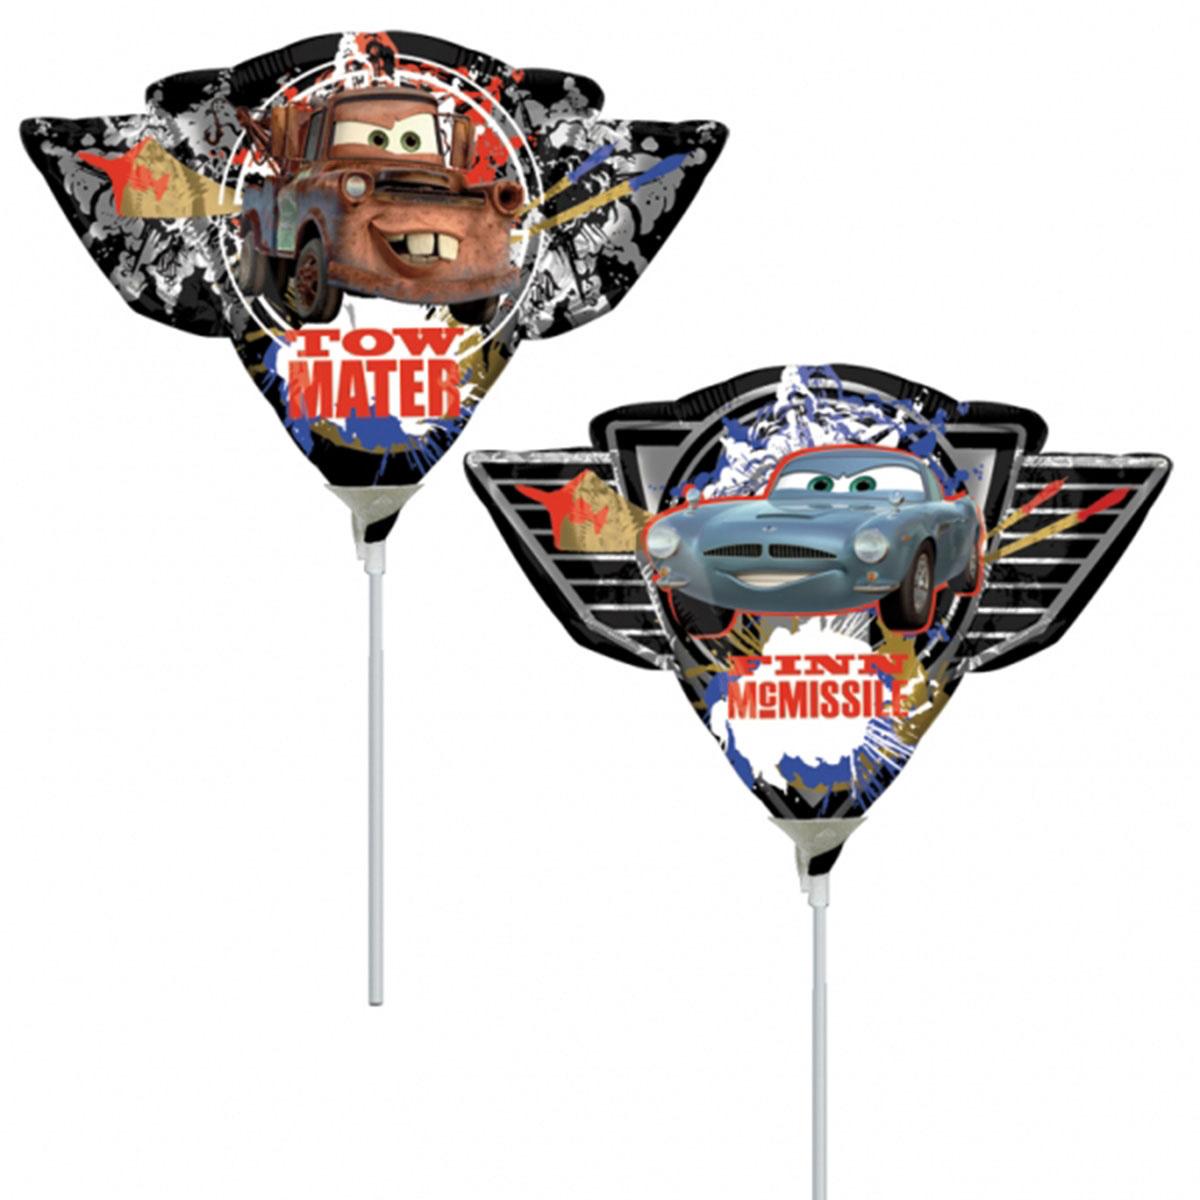 Finn McMissile/Tow Mater Mini Shape Balloon Balloons & Streamers - Party Centre